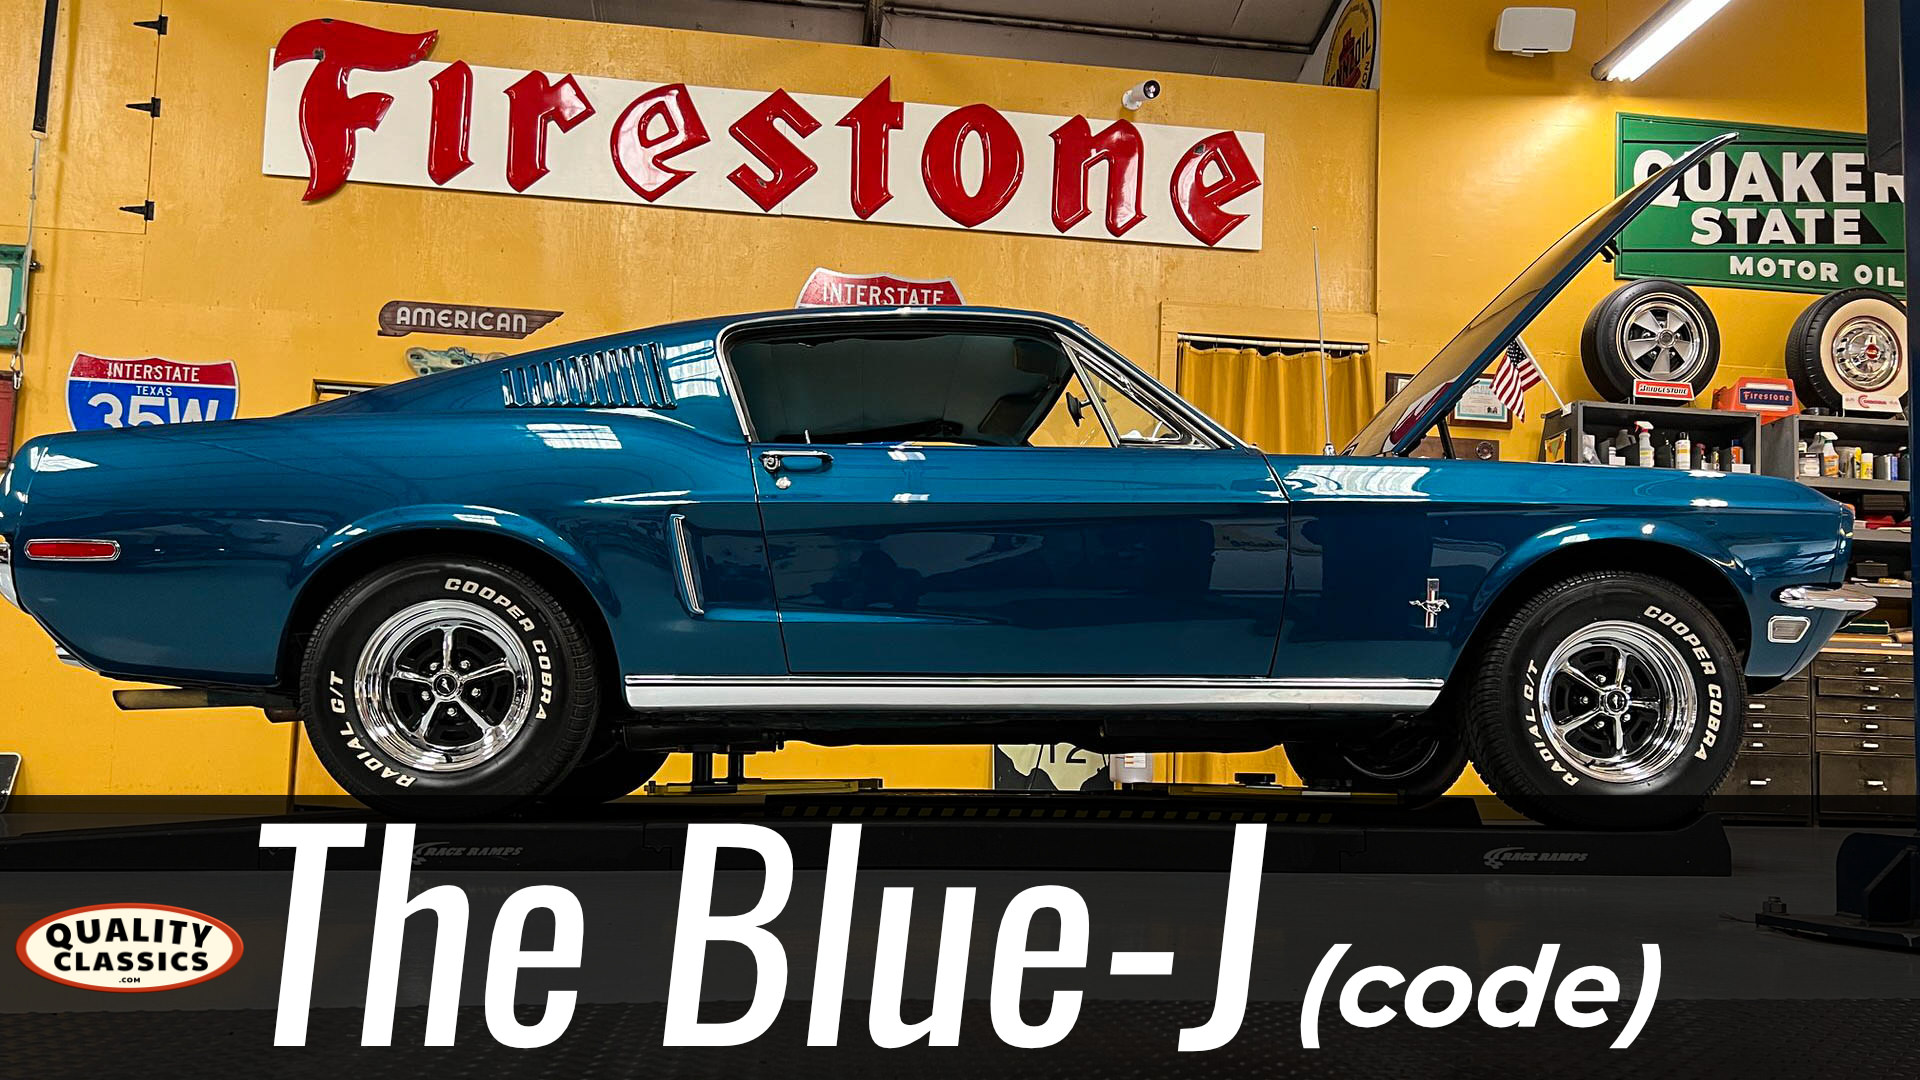 Acapulco Blue-J code 1968 Mustang Fastback 4-speed